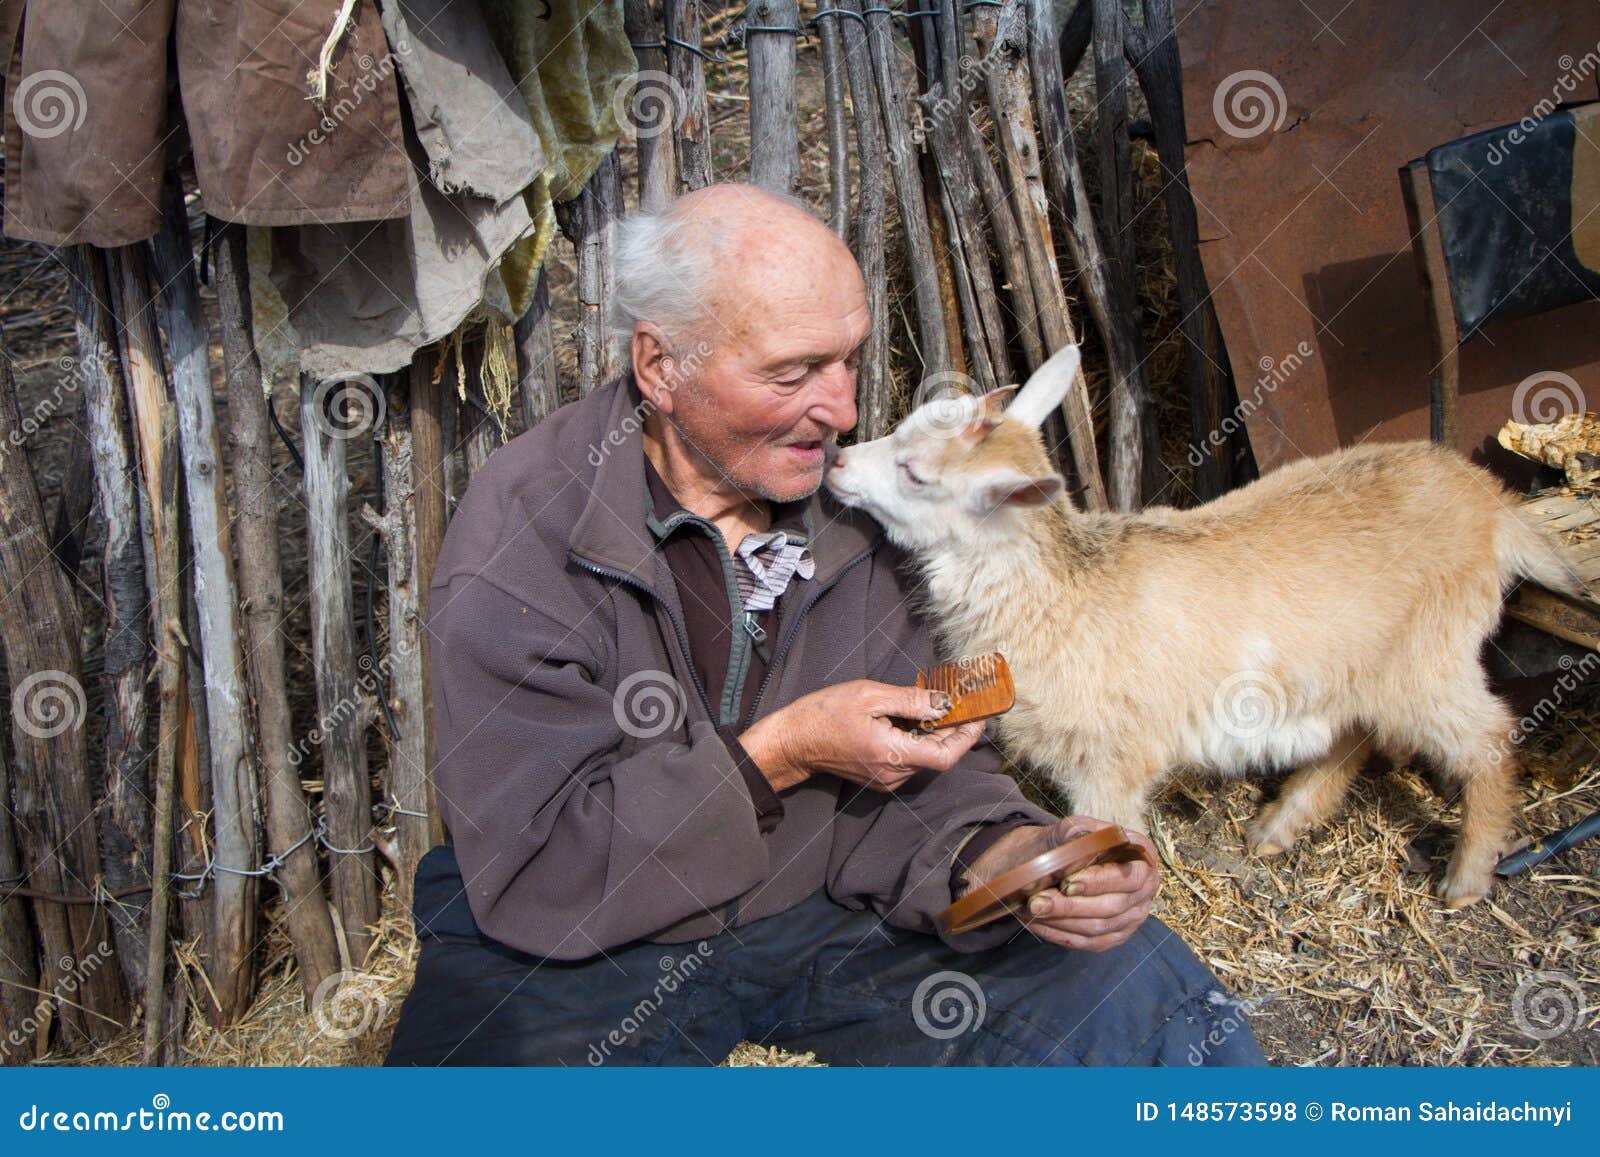 a very old man in messy clothes is sitting on a stool in the yard of an old farm and holding a white goat on his hands